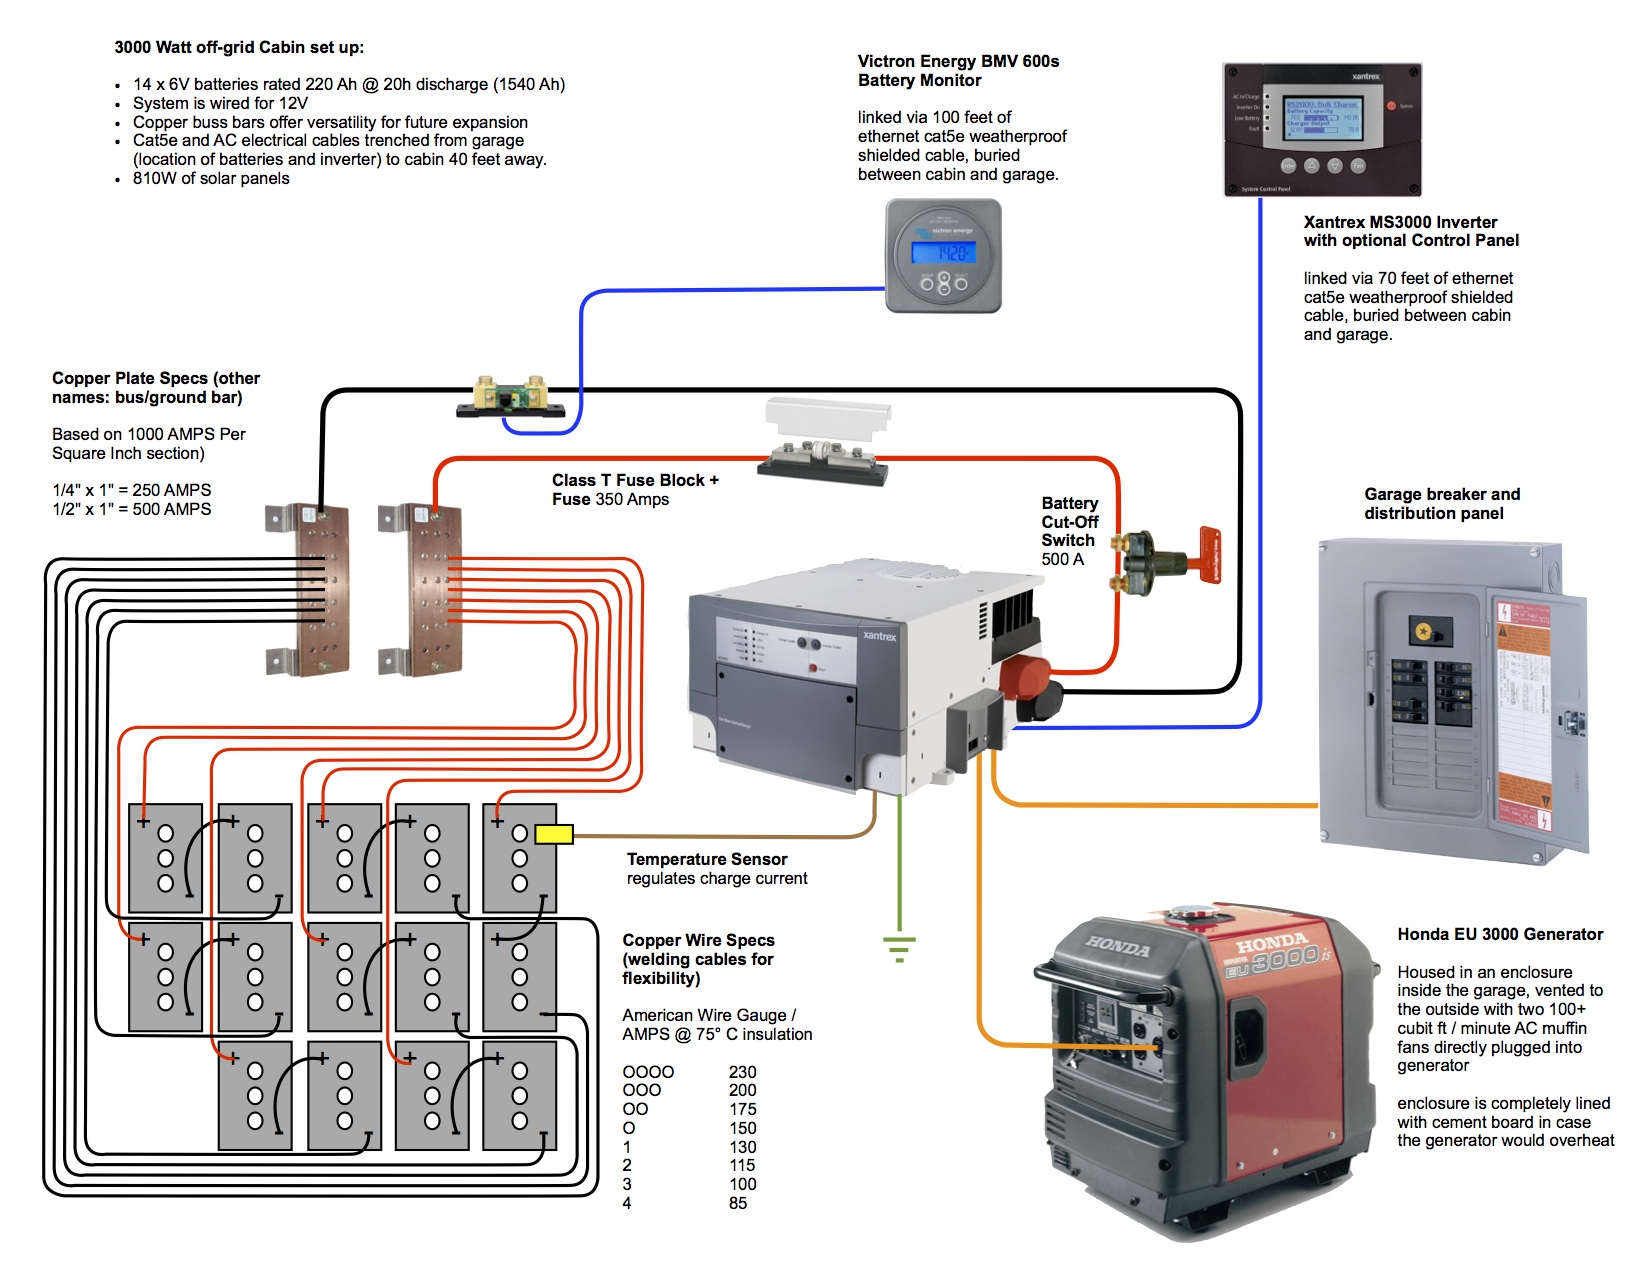  Solar Battery Bank Wiring Diagram also Wiring Diagram For Solar Panel